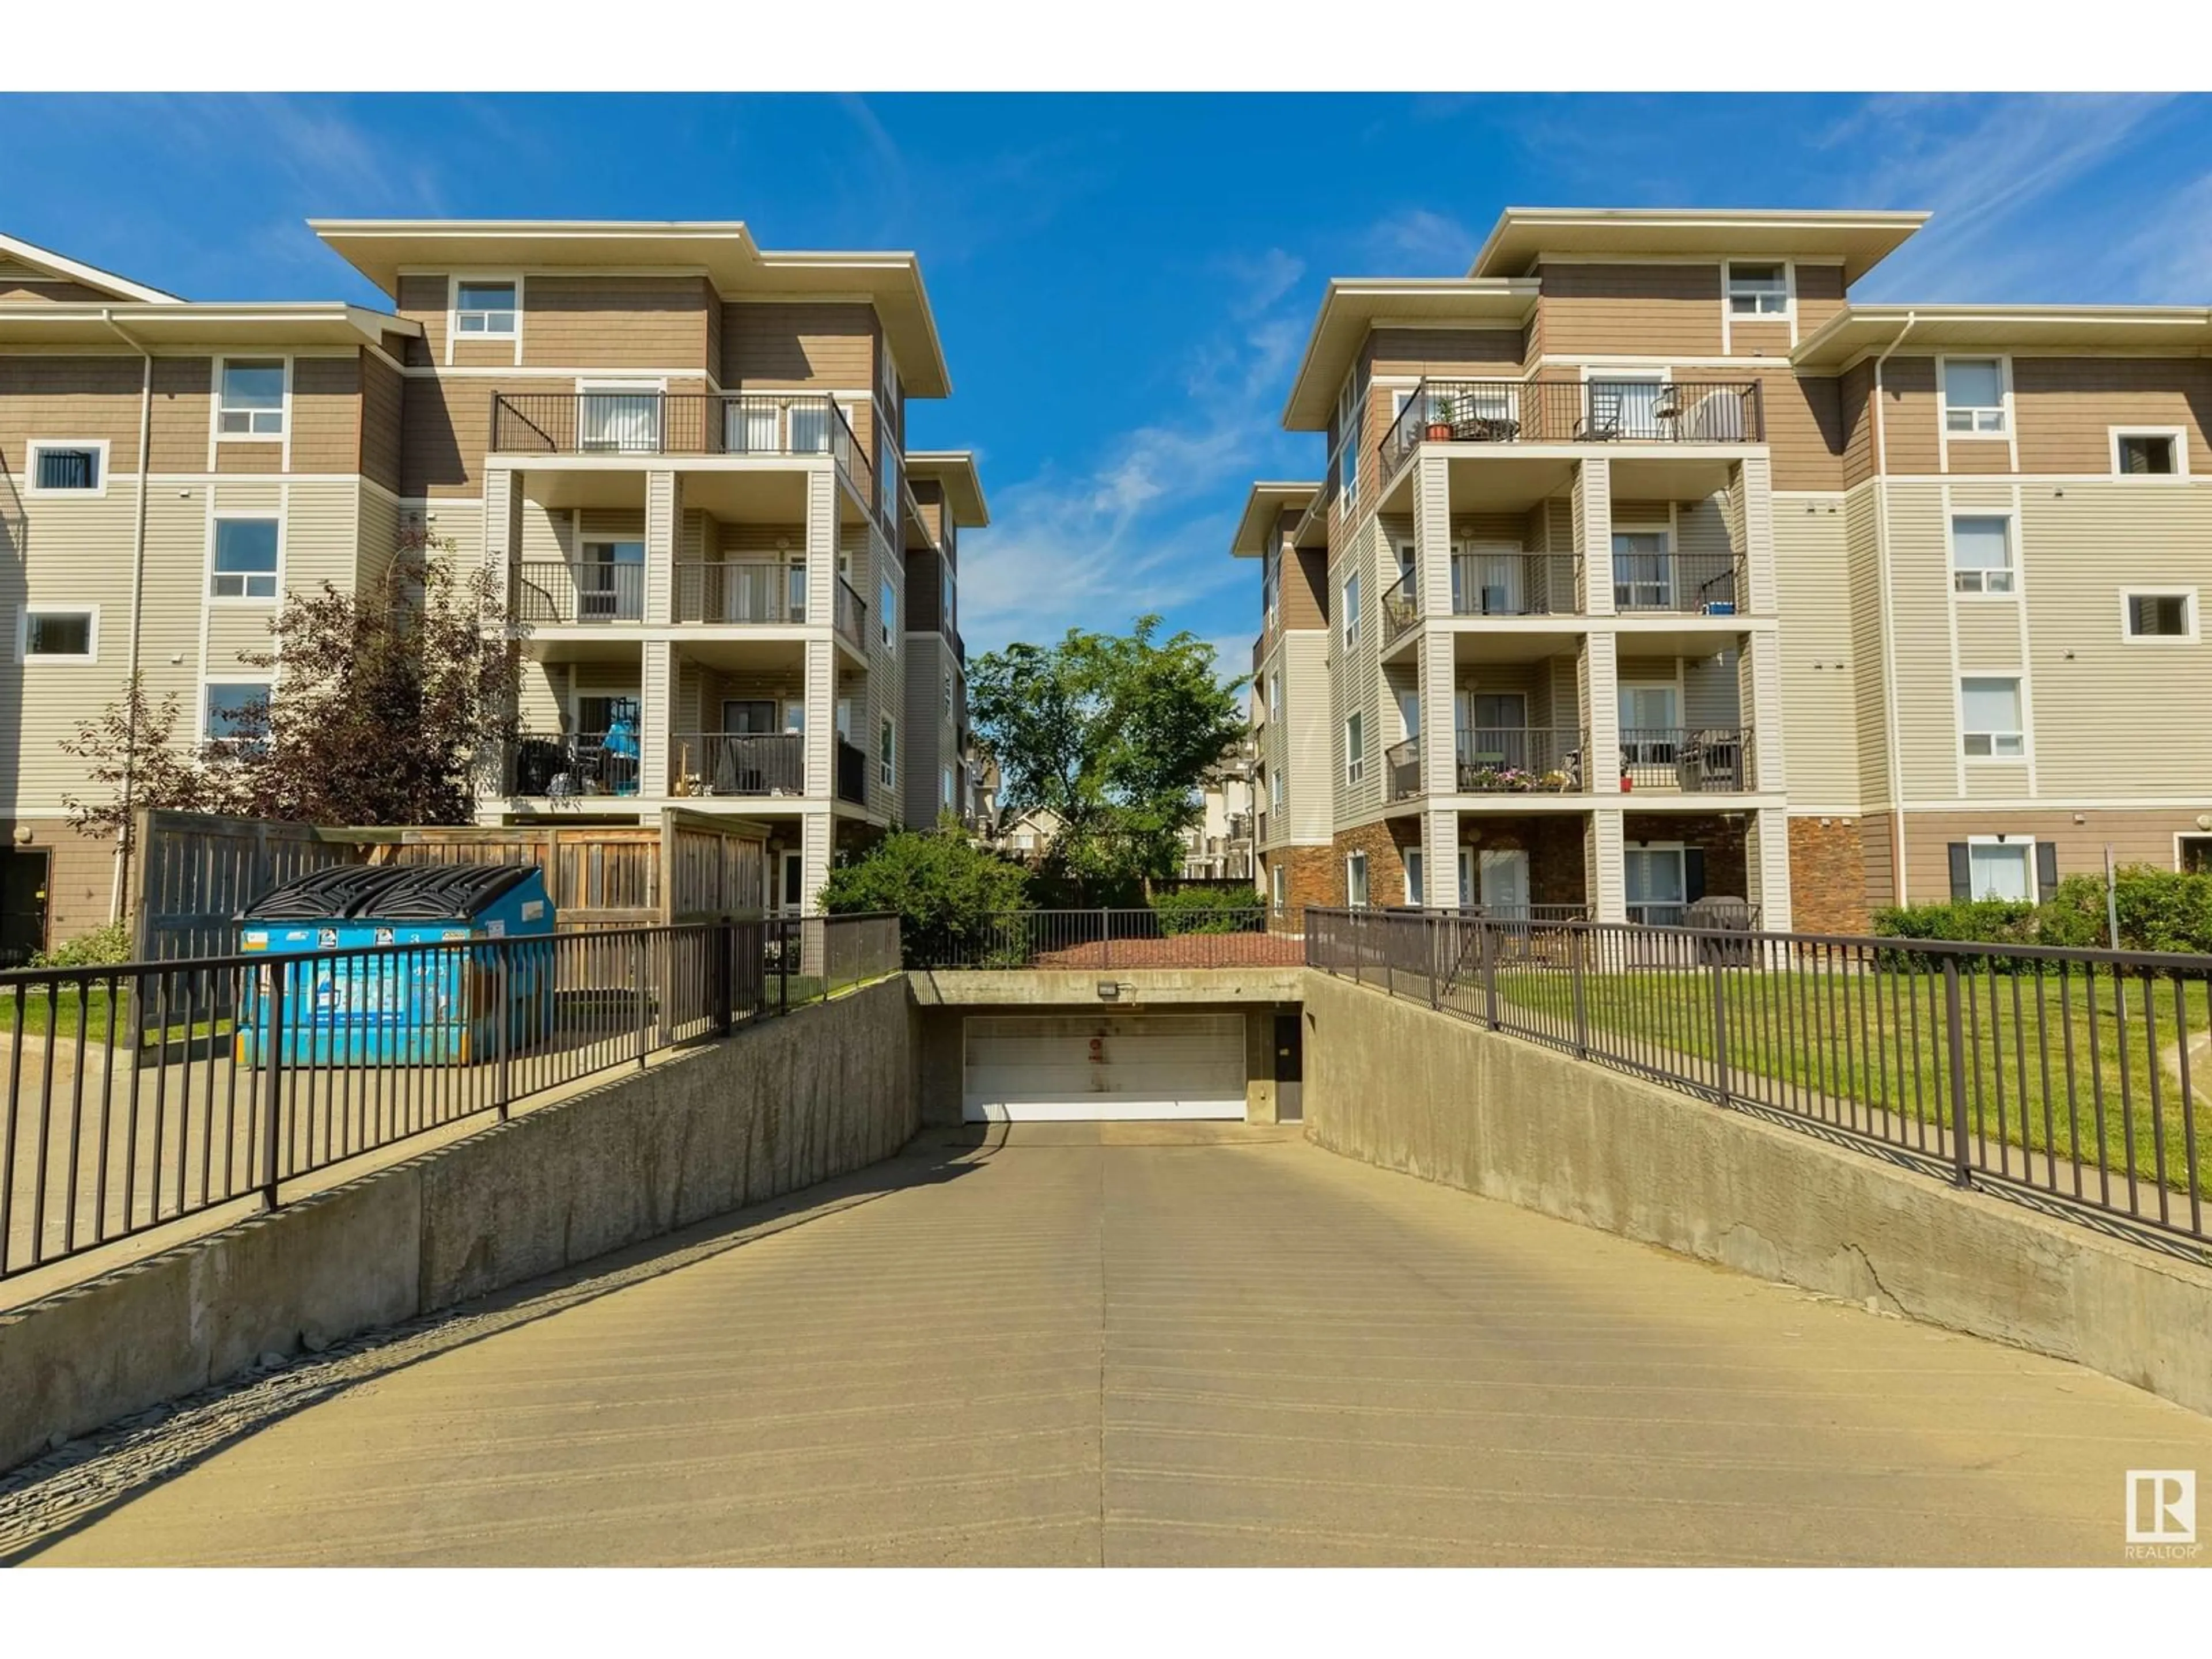 A pic from exterior of the house or condo for #6410 7331 SOUTH TERWILLEGAR DR NW, Edmonton Alberta T6M1V8